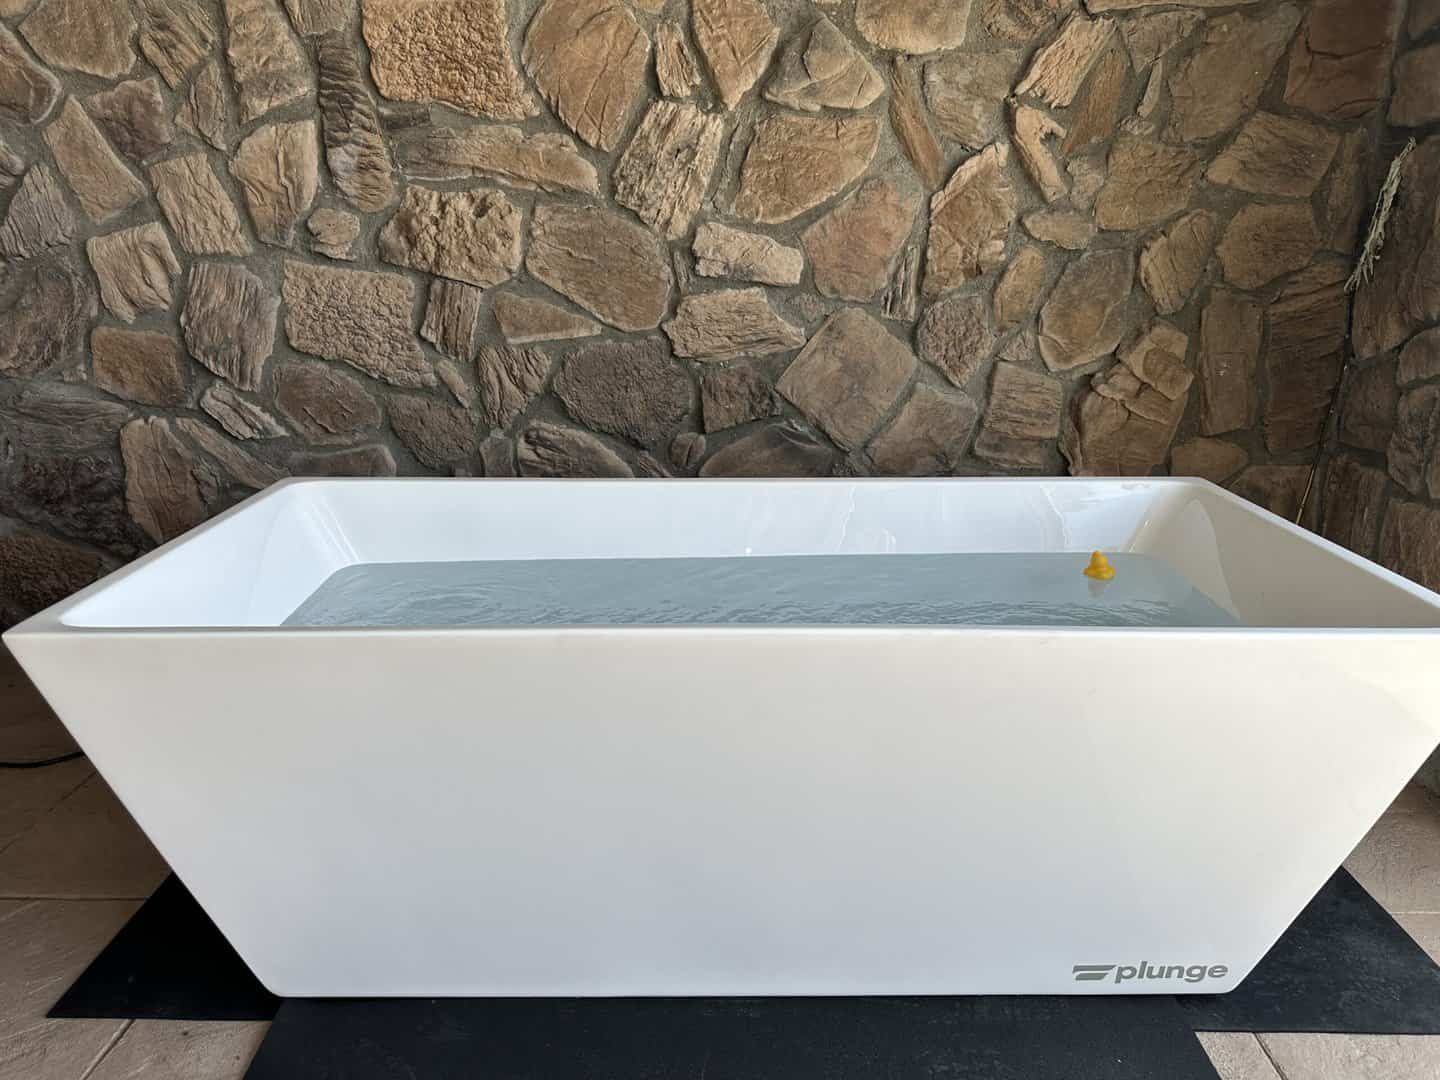 cold plunge tub filled with water